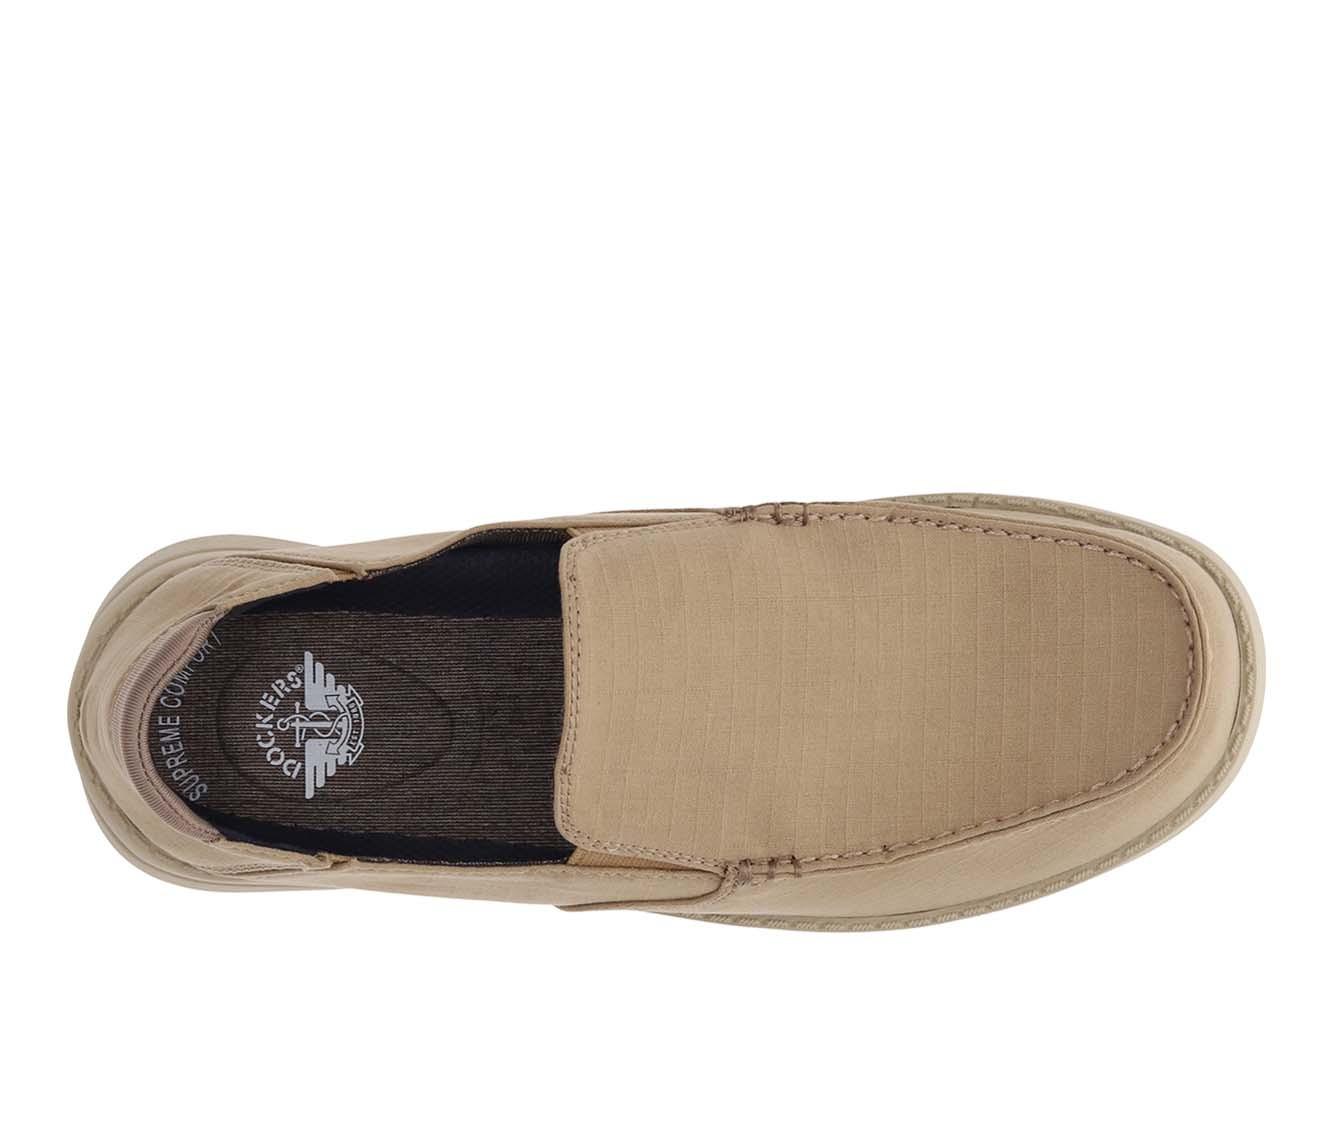 Men's Dockers Wiley Casual Loafers